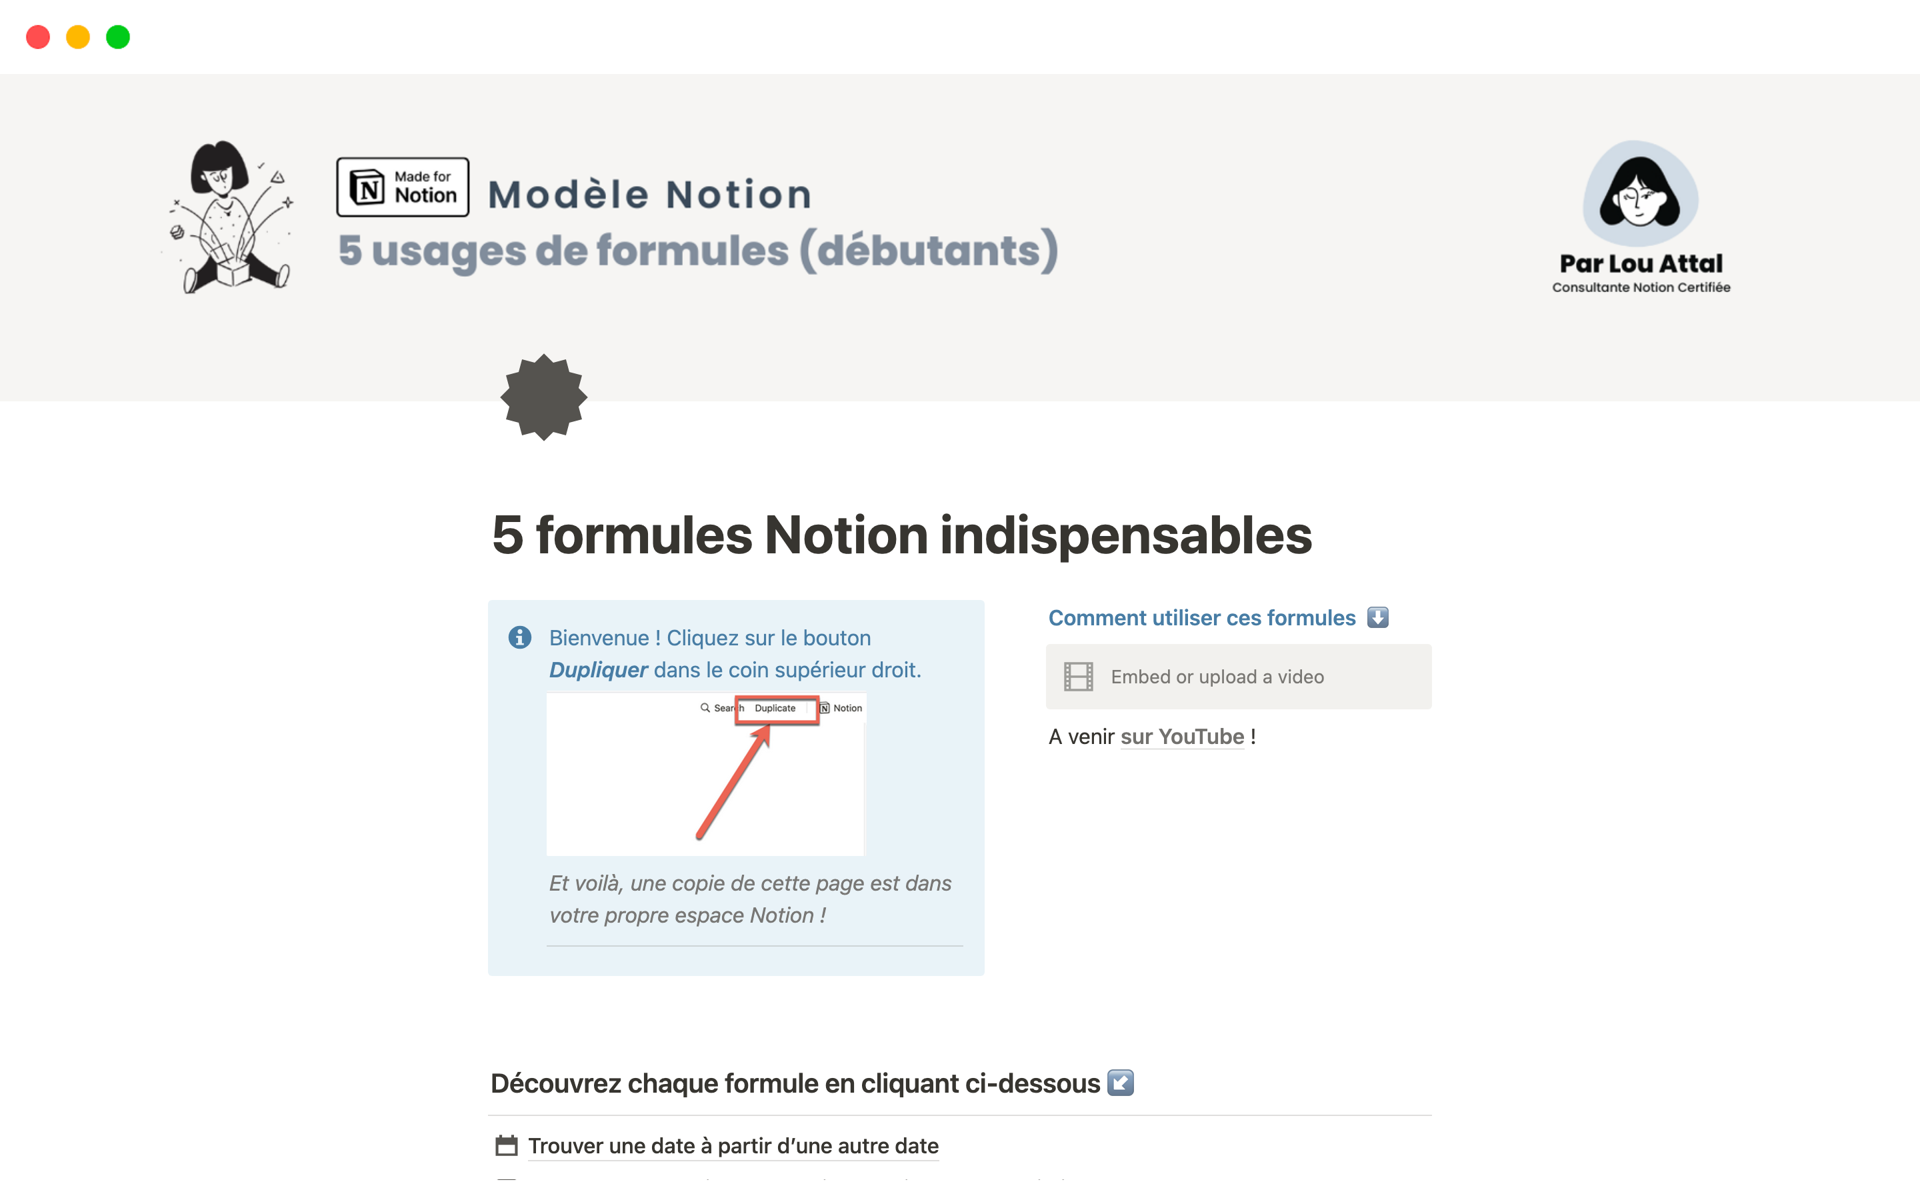 A template preview for 5 formules Notion indispensables